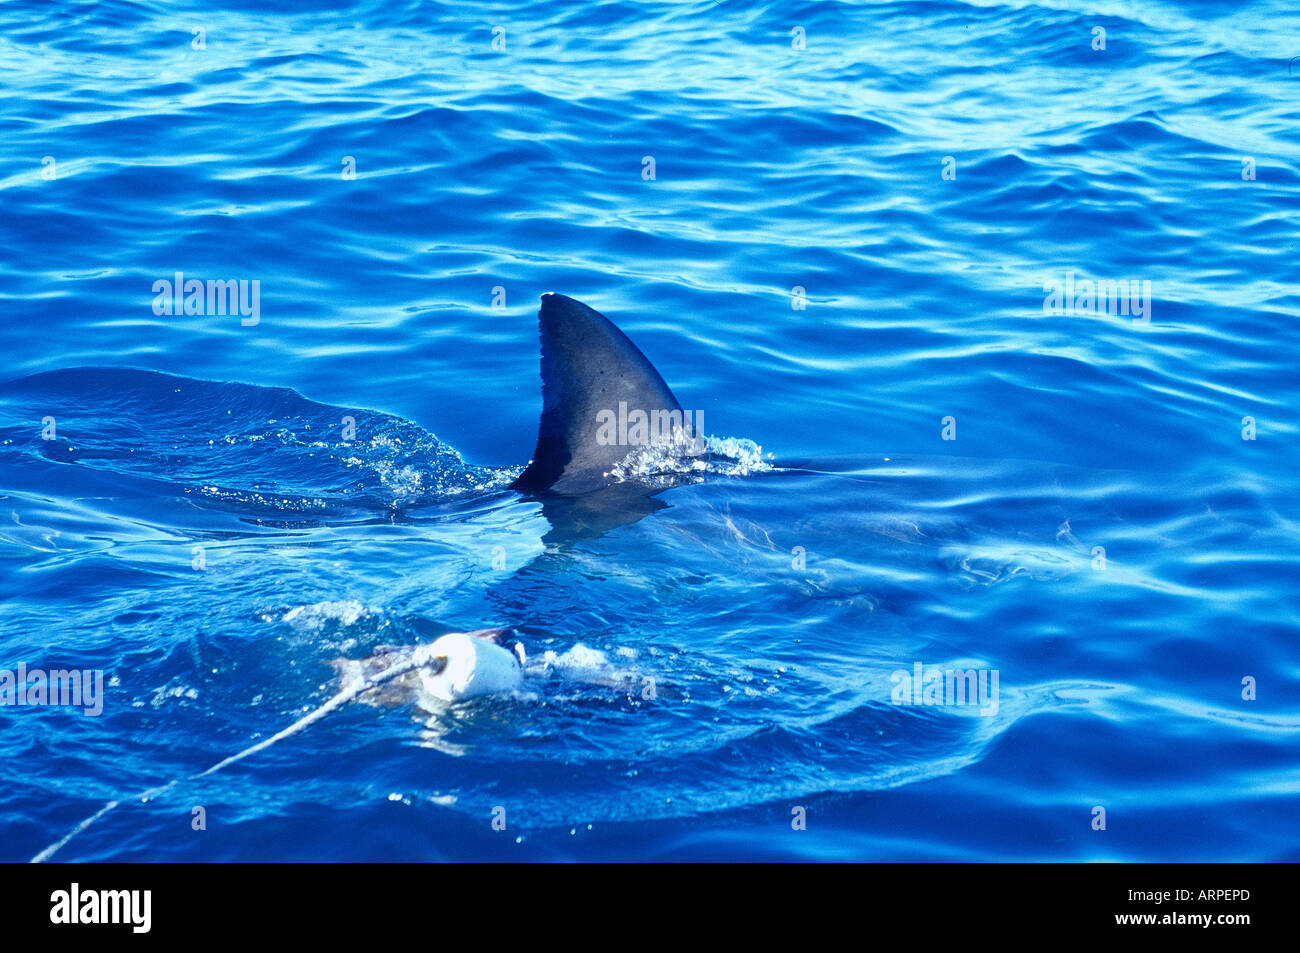 Dorsal fin of a great white shark breaking the surface Stock Photo - Alamy